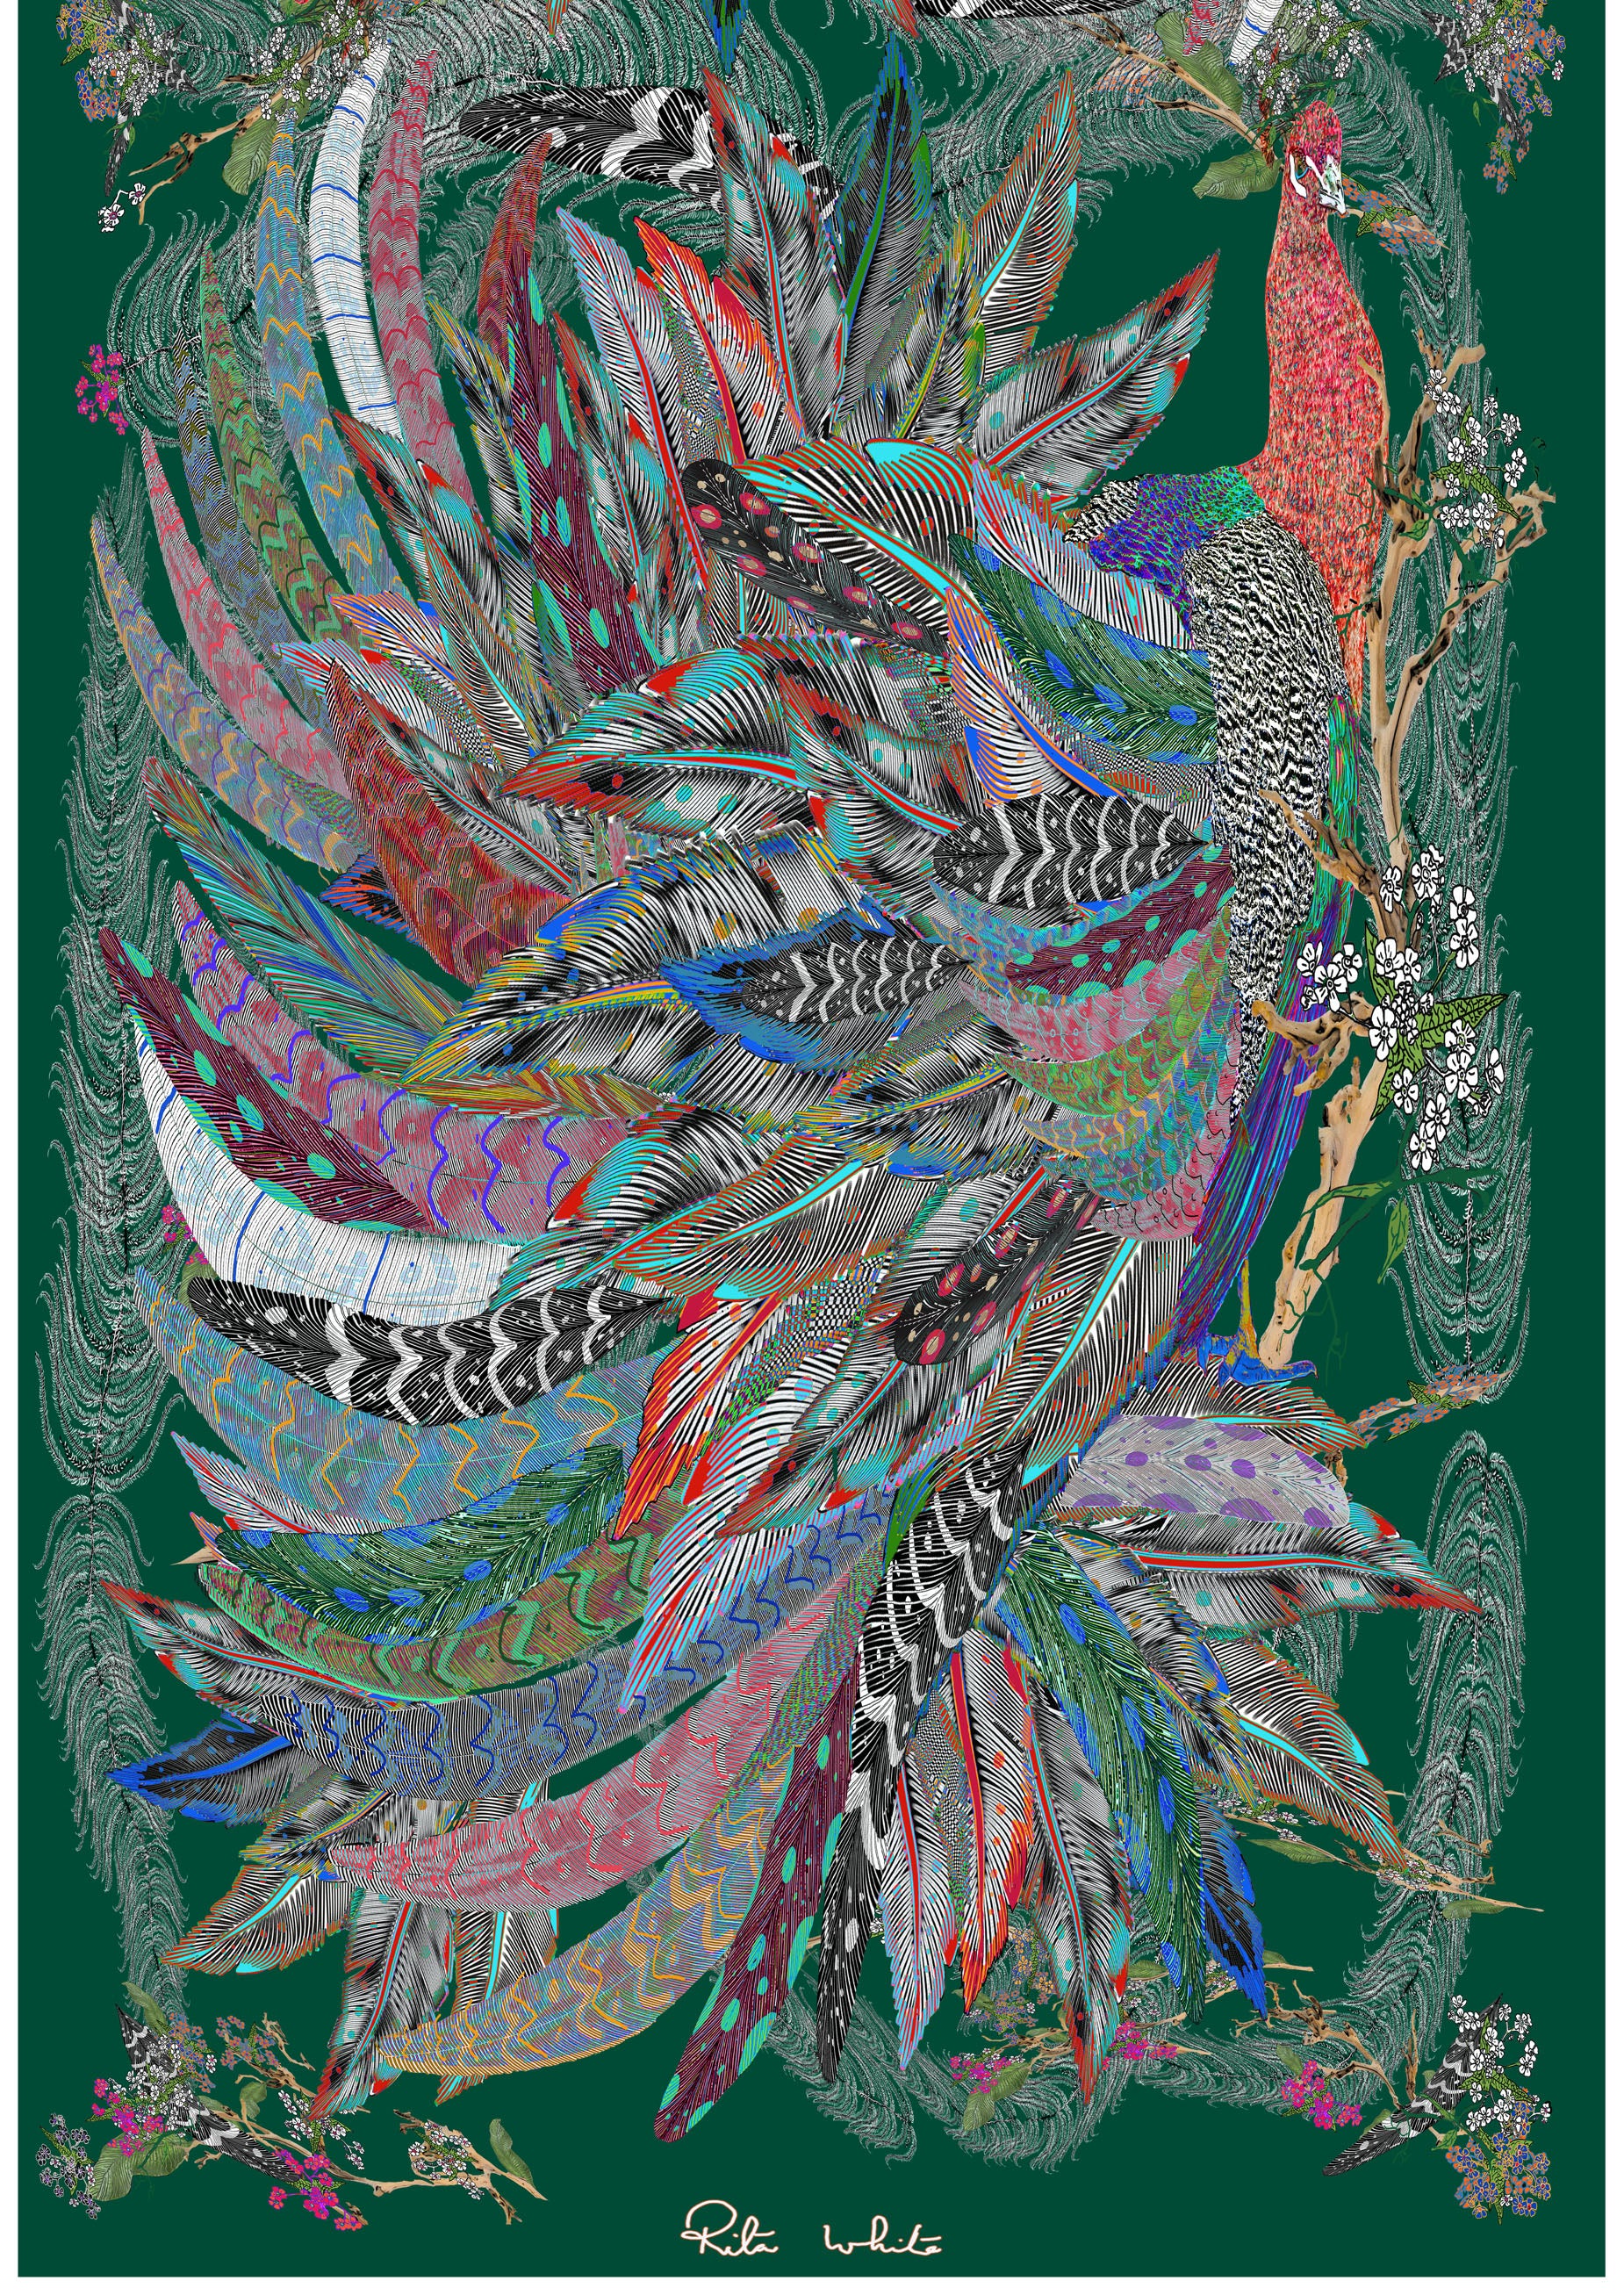 The Proud Peacock in Green. Long Silk Scarves